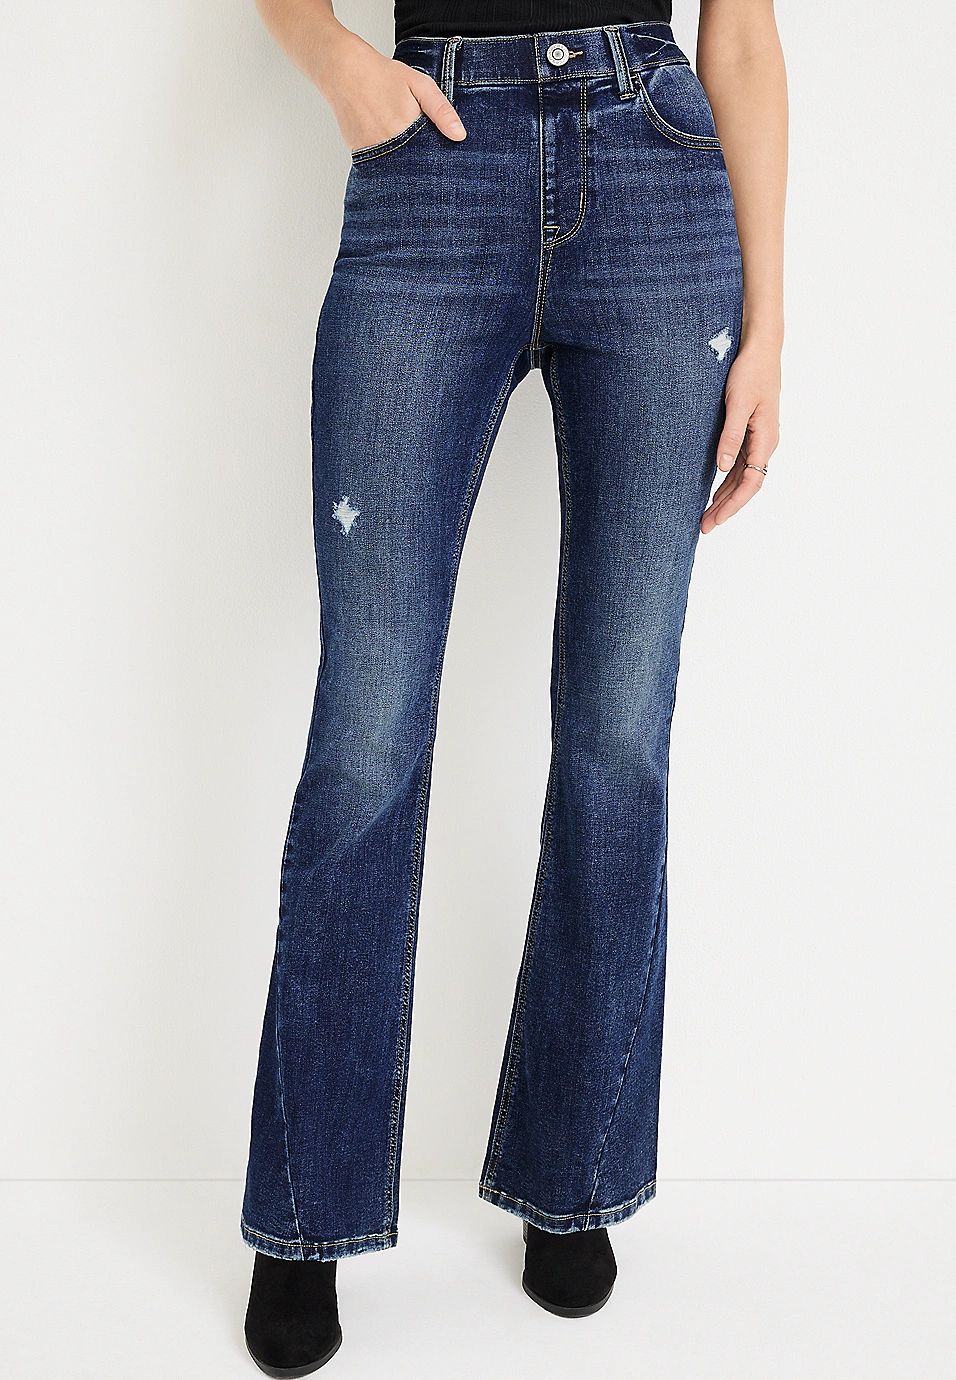 m jeans by maurices™ Cool Comfort Flare Super High Rise Jean | Maurices